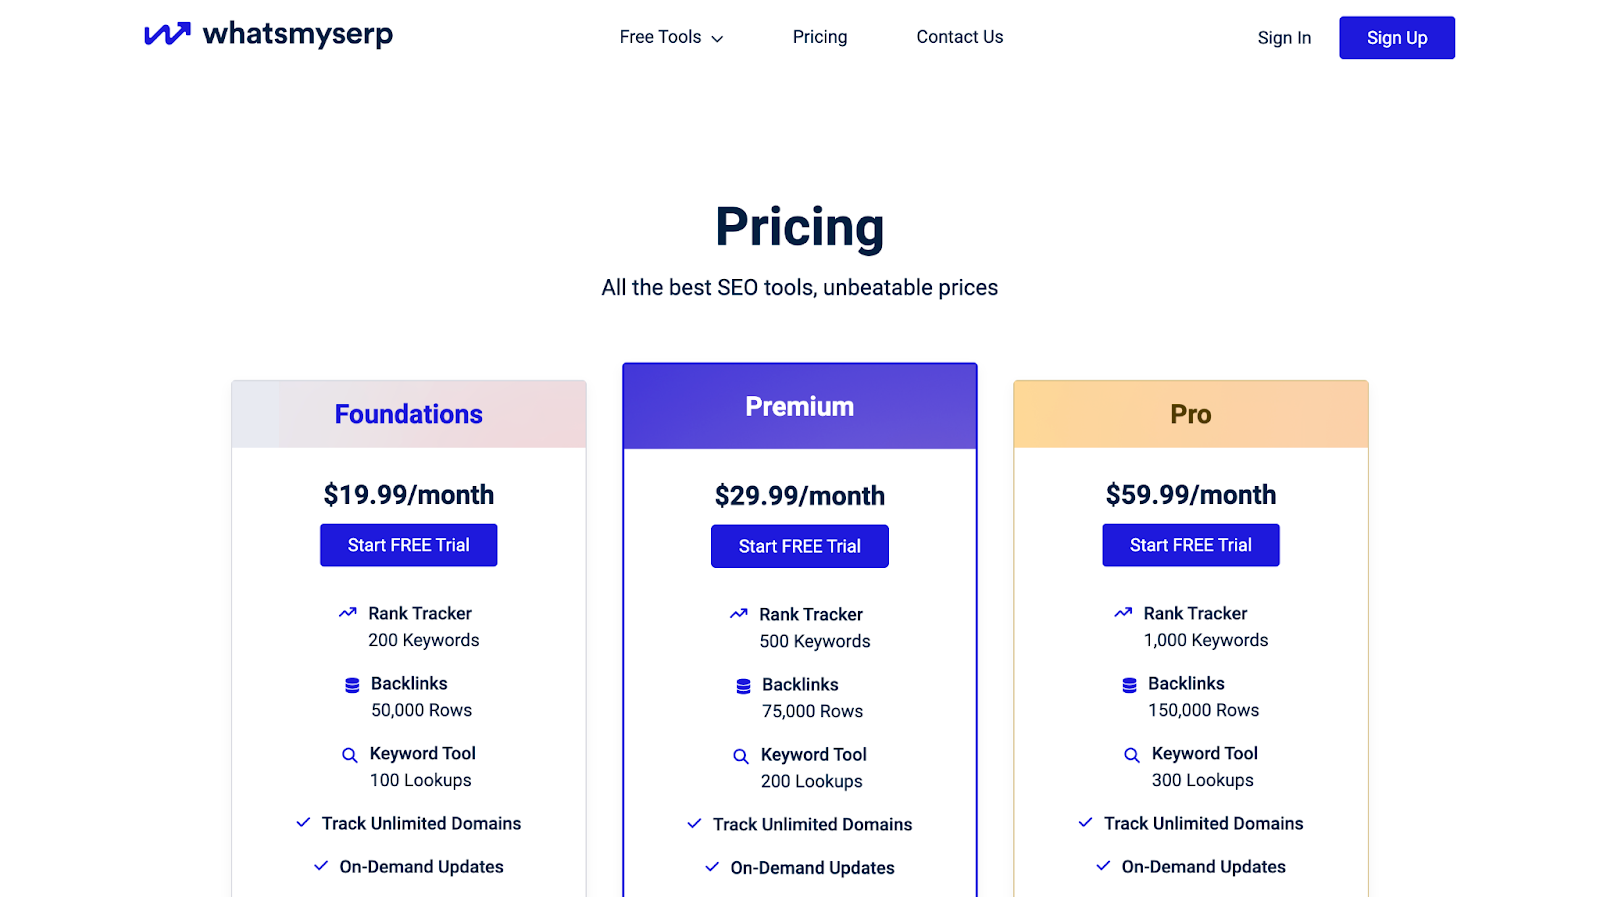 WhatsMySERP Pricing - Best Rank Tracker Tools